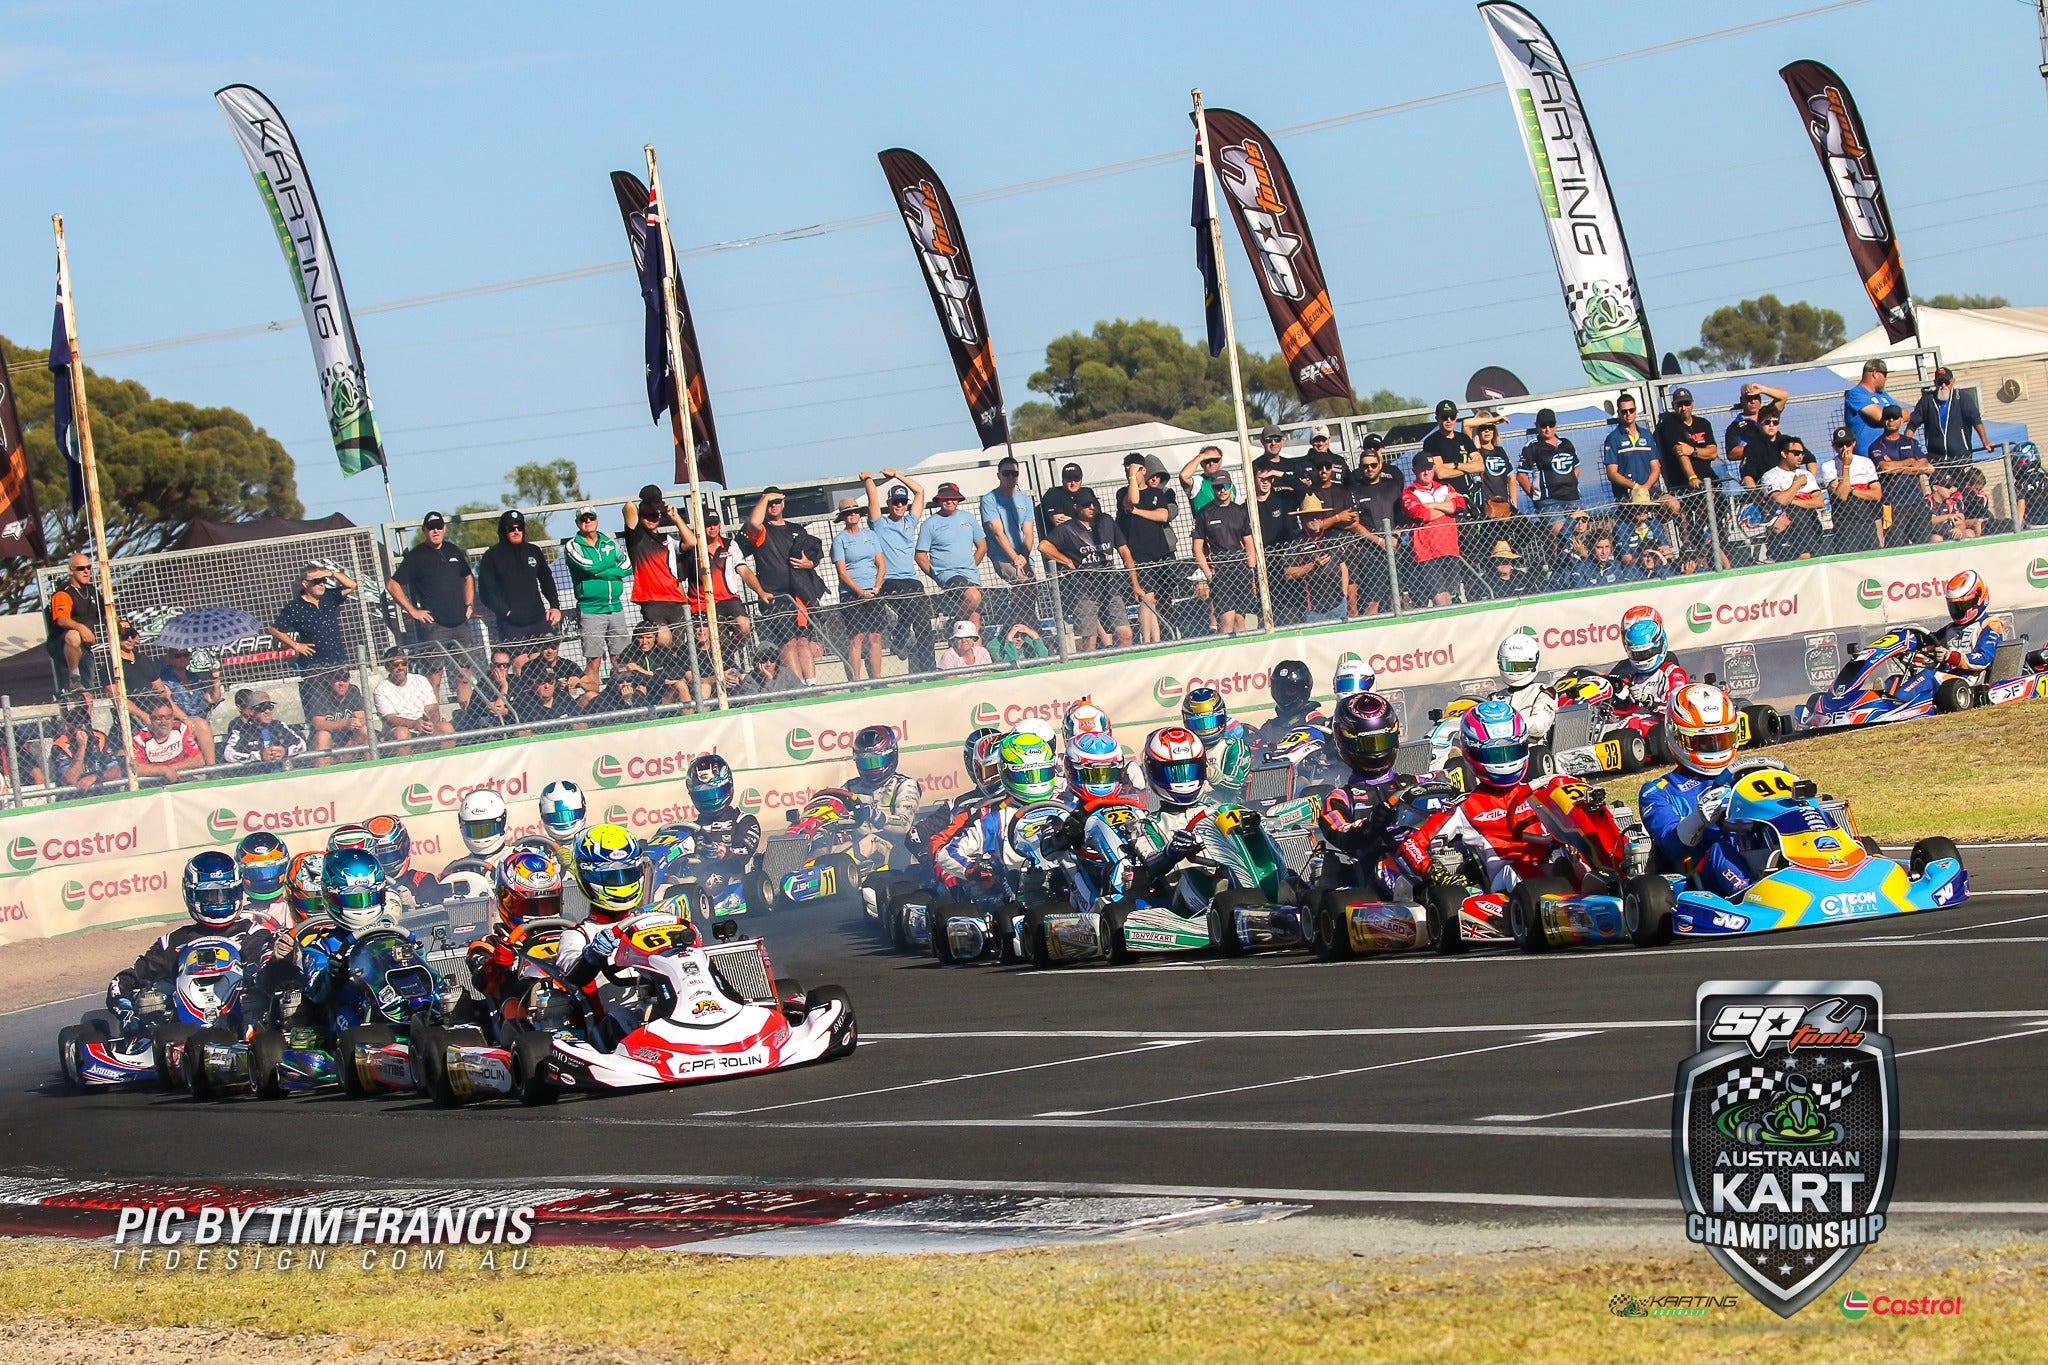 Rev Up Your Racing: A Guide to Competitive Go-Karting